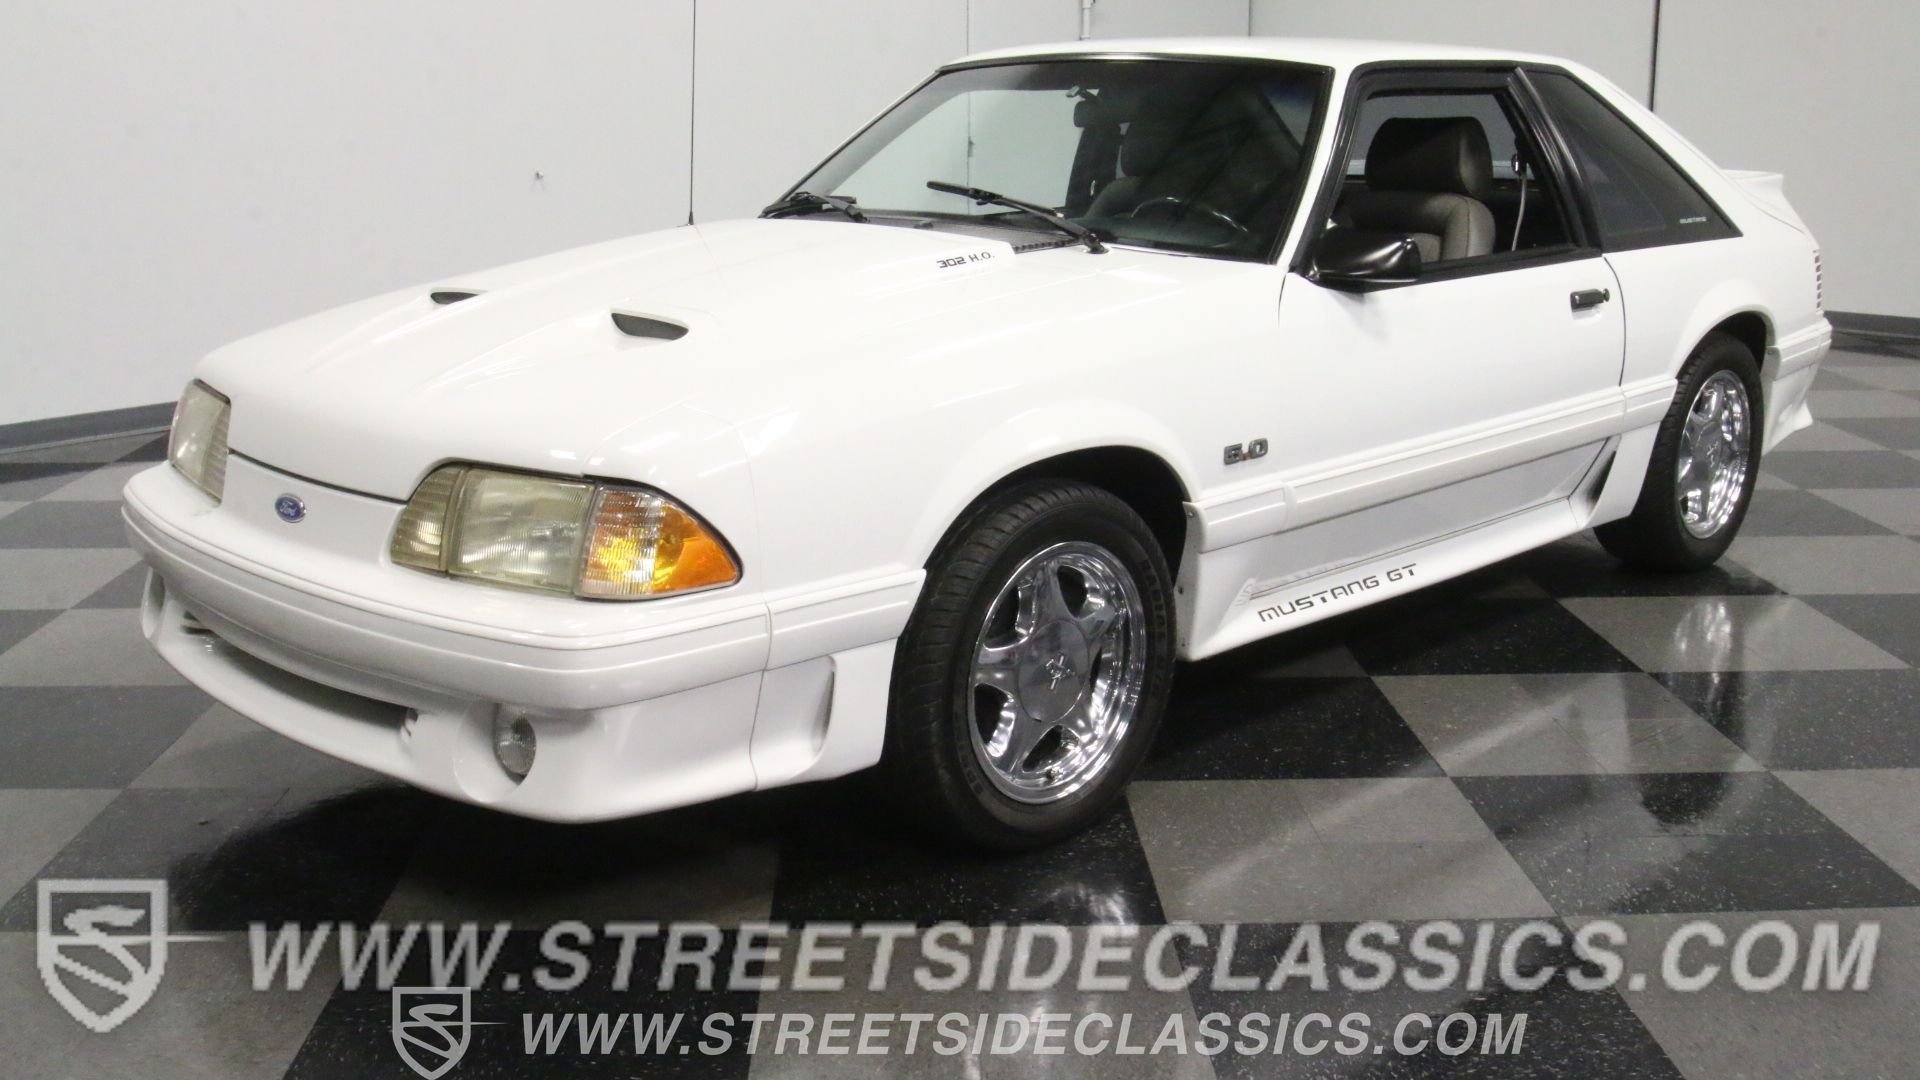 1989 Ford Mustang | Classic Cars For Sale - Streetside Classics